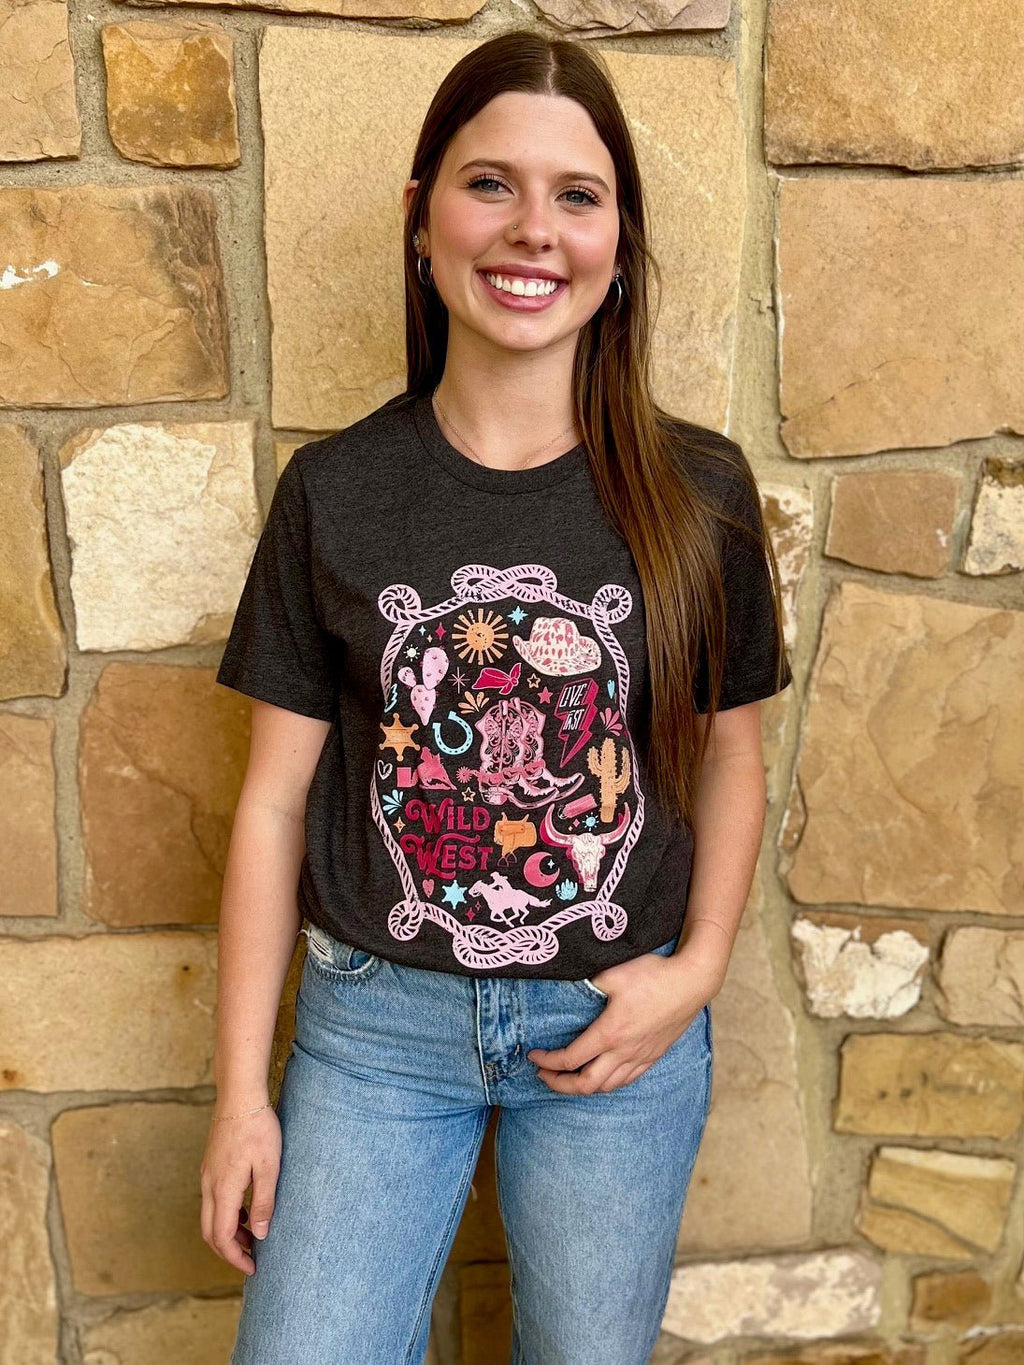 Saddle up and get ready to wrangle in style with our Colors of the Wild West Tee! This heather charcoal grey shirt features a crew neck, short sleeves, and a playful print of all the western essentials including a rope, cowboy hat, cactus, horse shoe, and barrel racer. Made from 100% cotton for ultimate comfort, pair it with your favorite cowboy boots for the perfect western-inspired look. Giddy up!